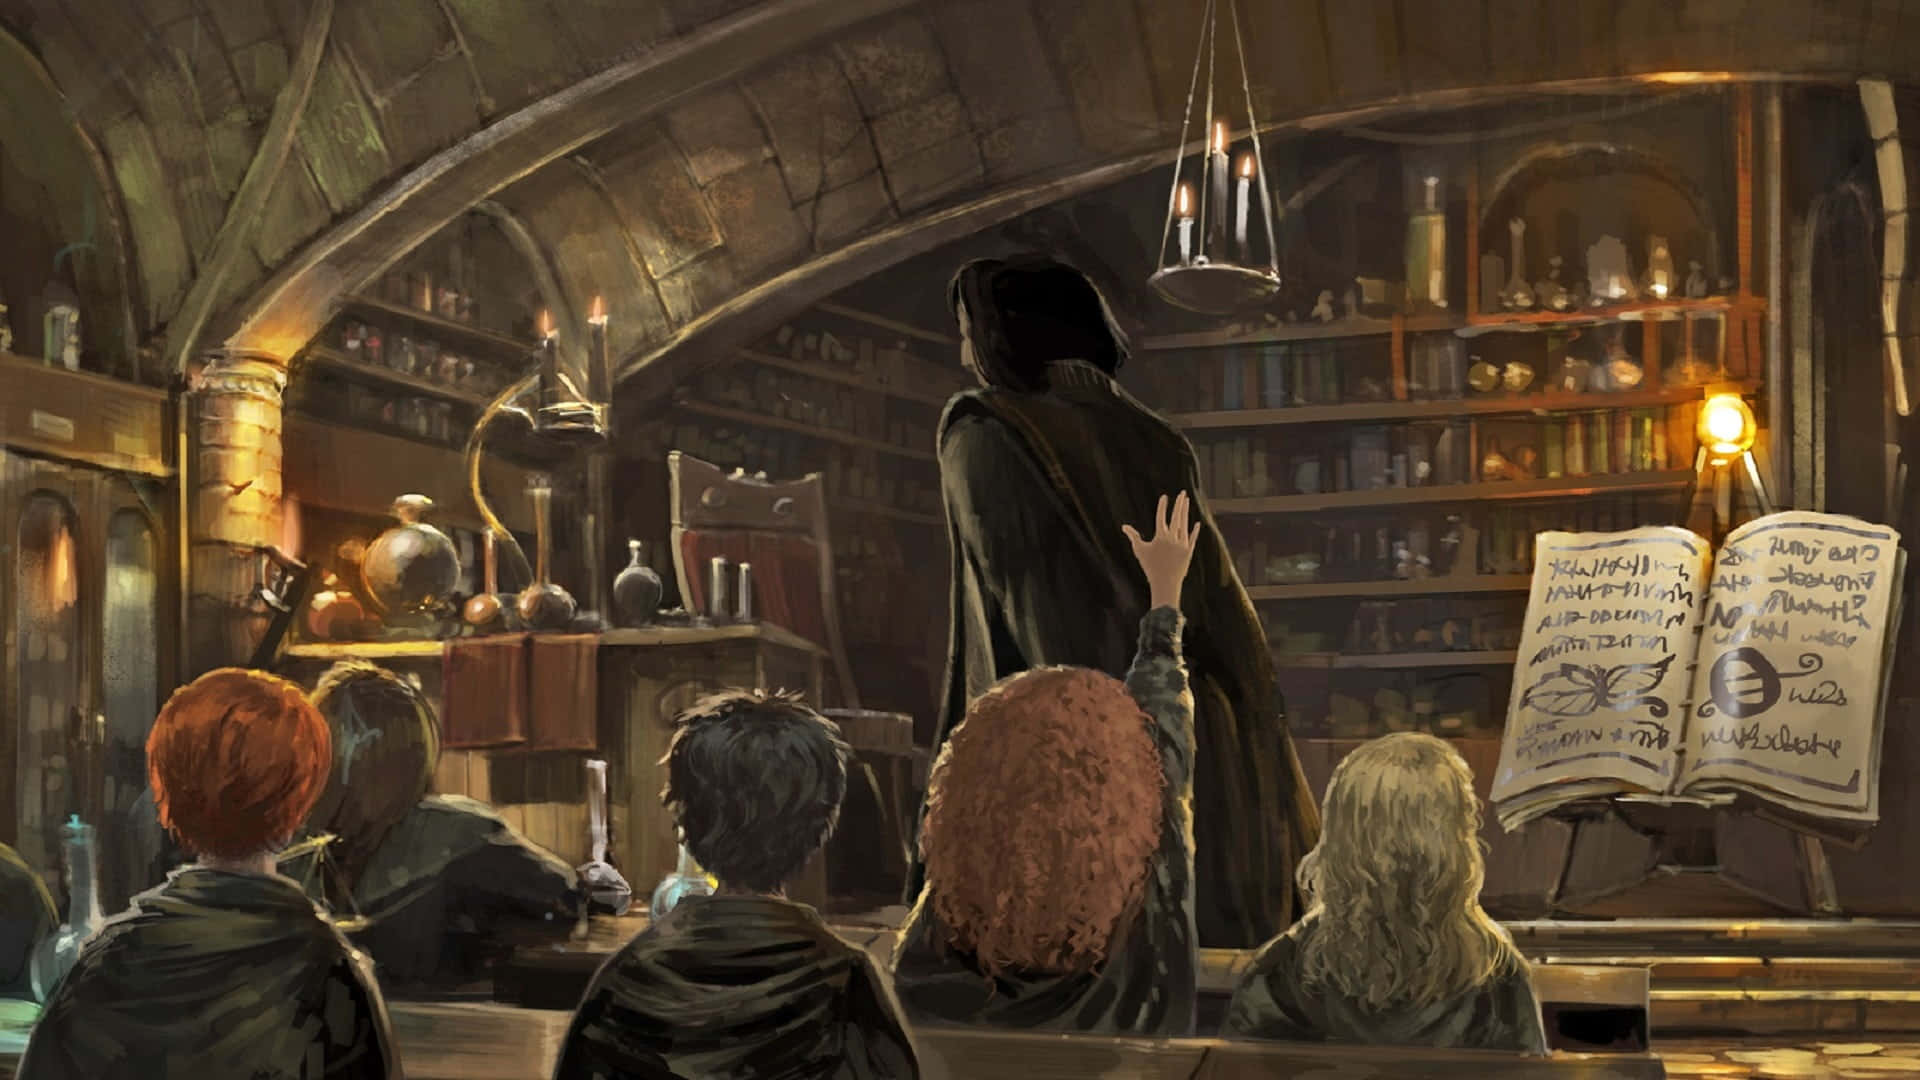 Immerse yourself in the magical and mysterious world of Potions class at Hogwarts. Wallpaper